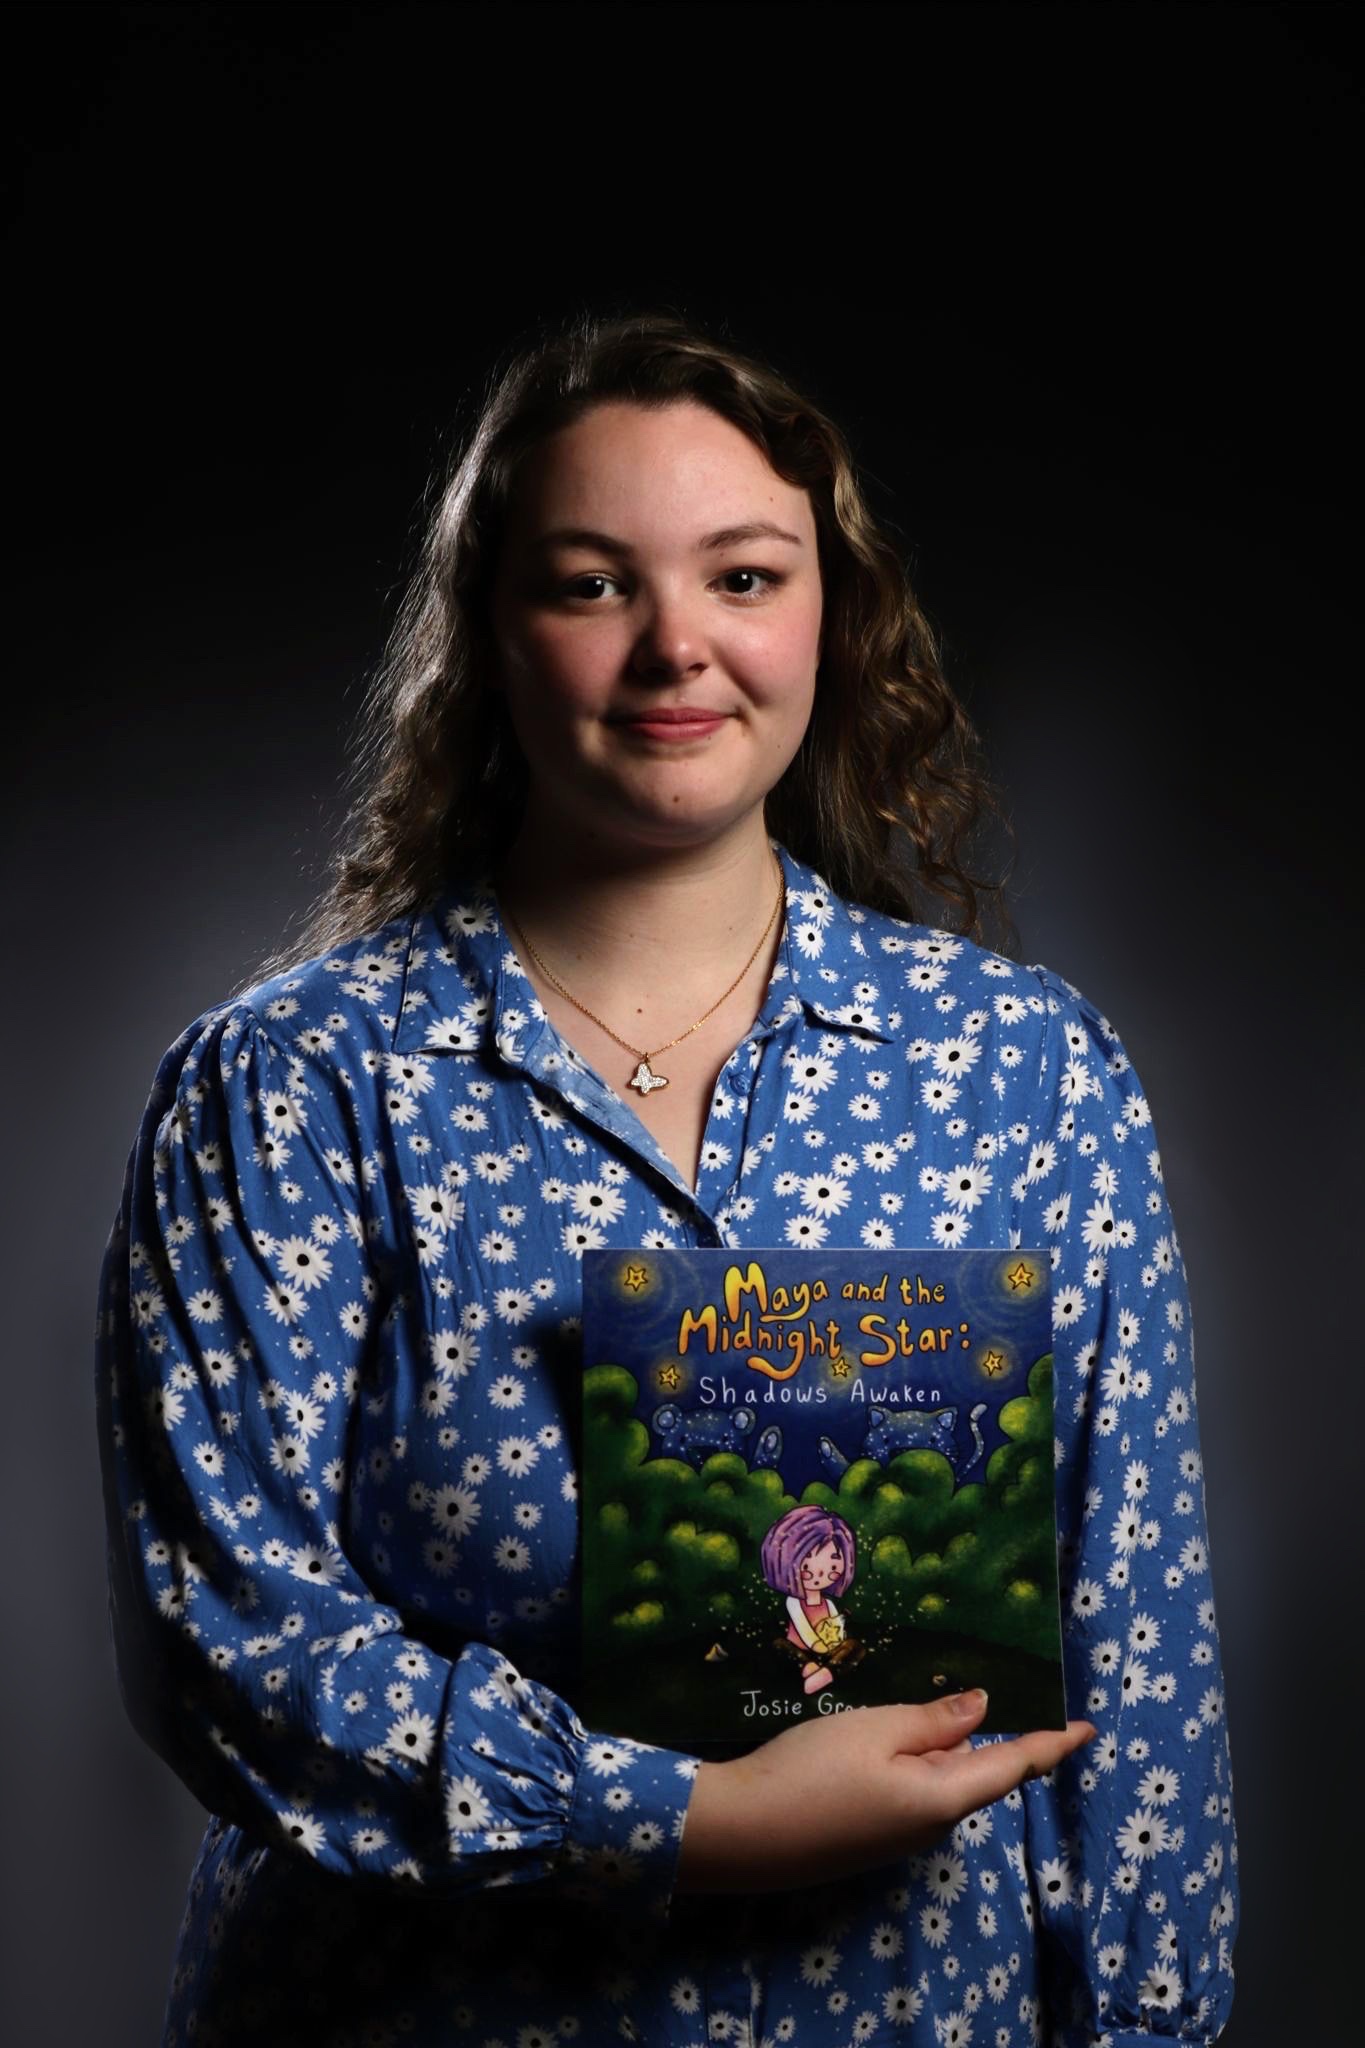 BTEC Art and Design student has written, illustrated and published magical children’s book